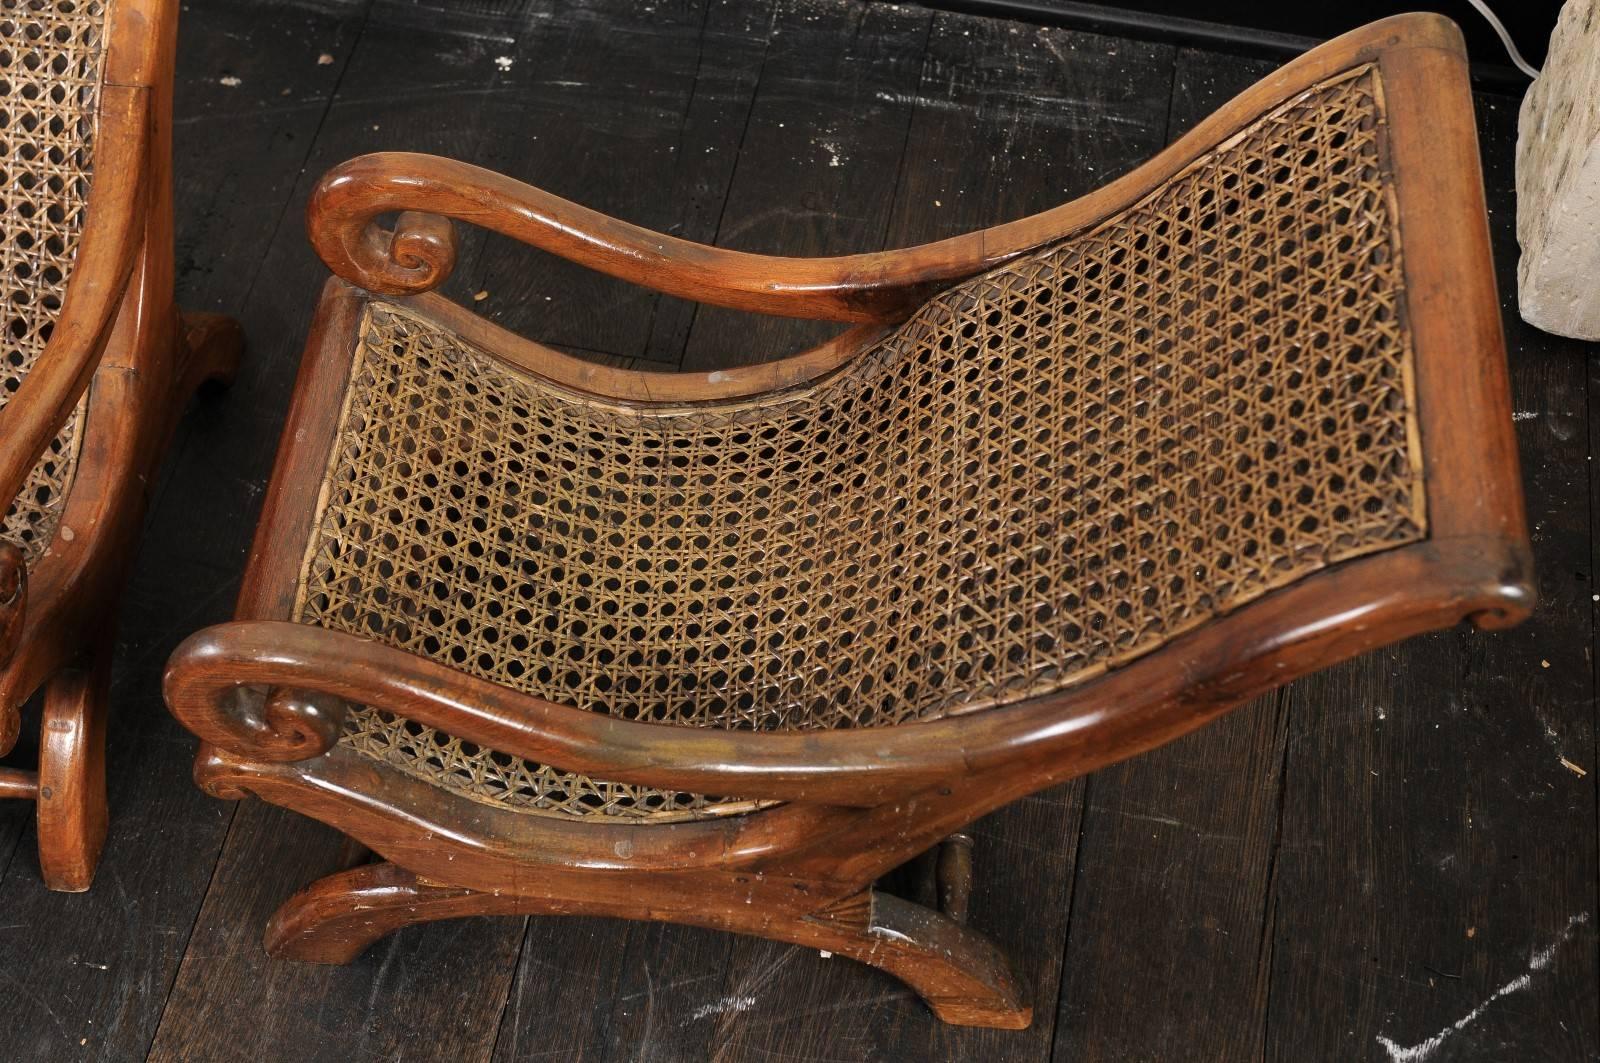 English 19th C. Children's Teak & Cane Chairs -Great Decor Accents or Display! For Sale 3